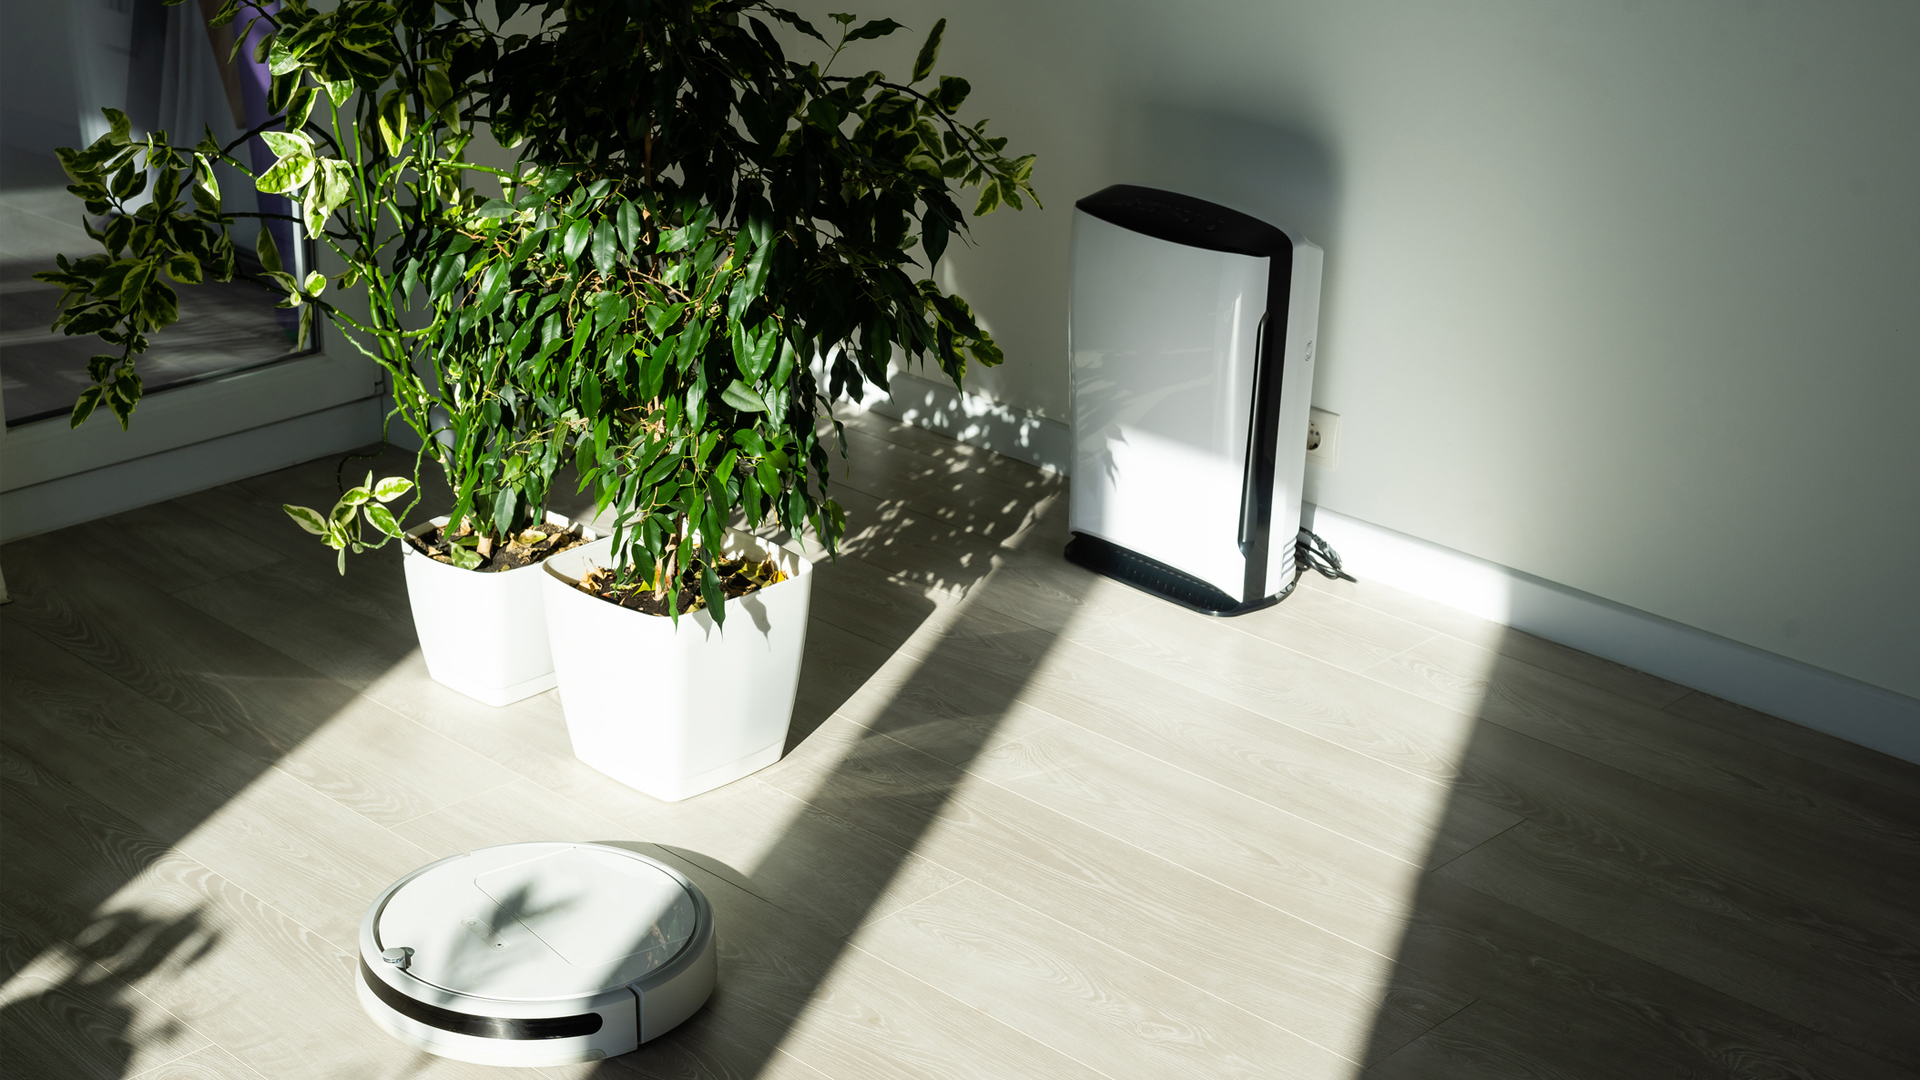 dehumidifier in an apartment plus some plants